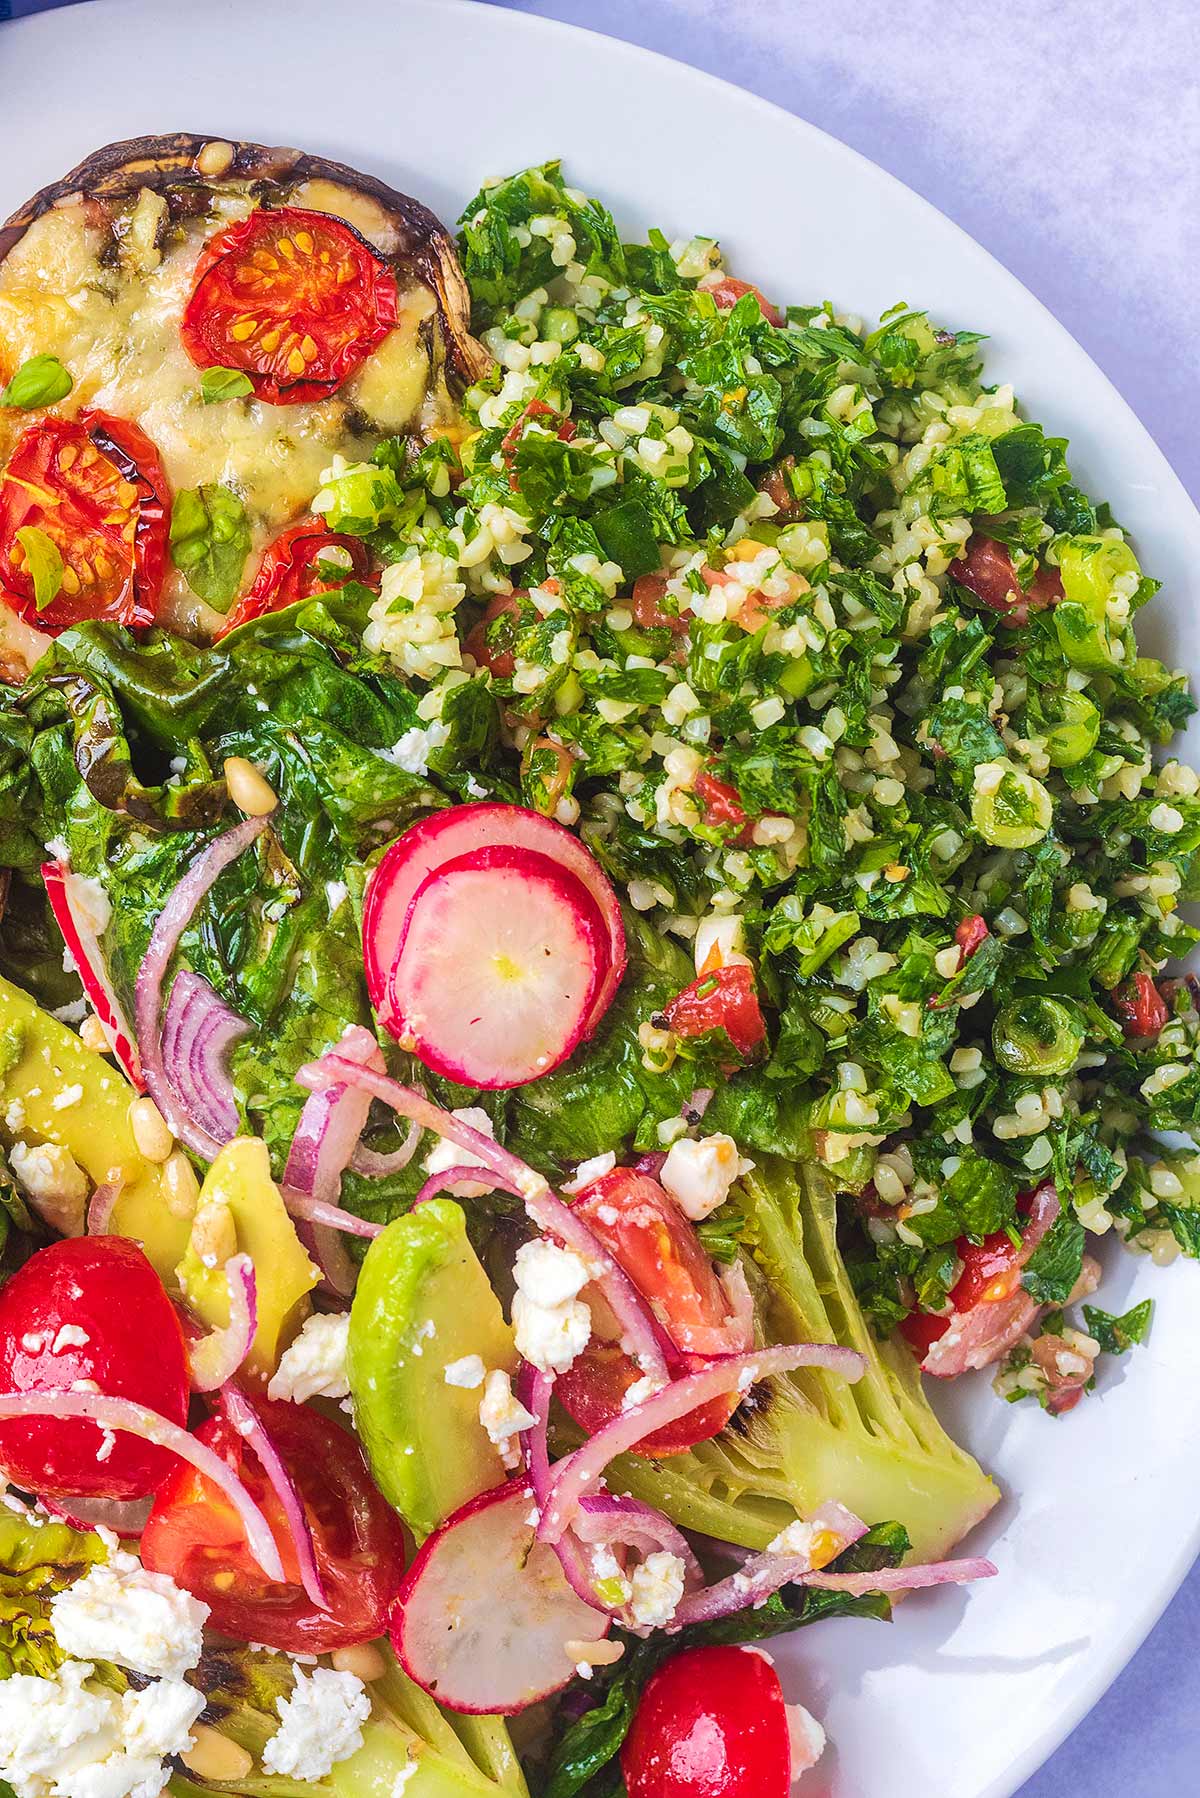 A plate of tabbouleh, salad and mushroom.